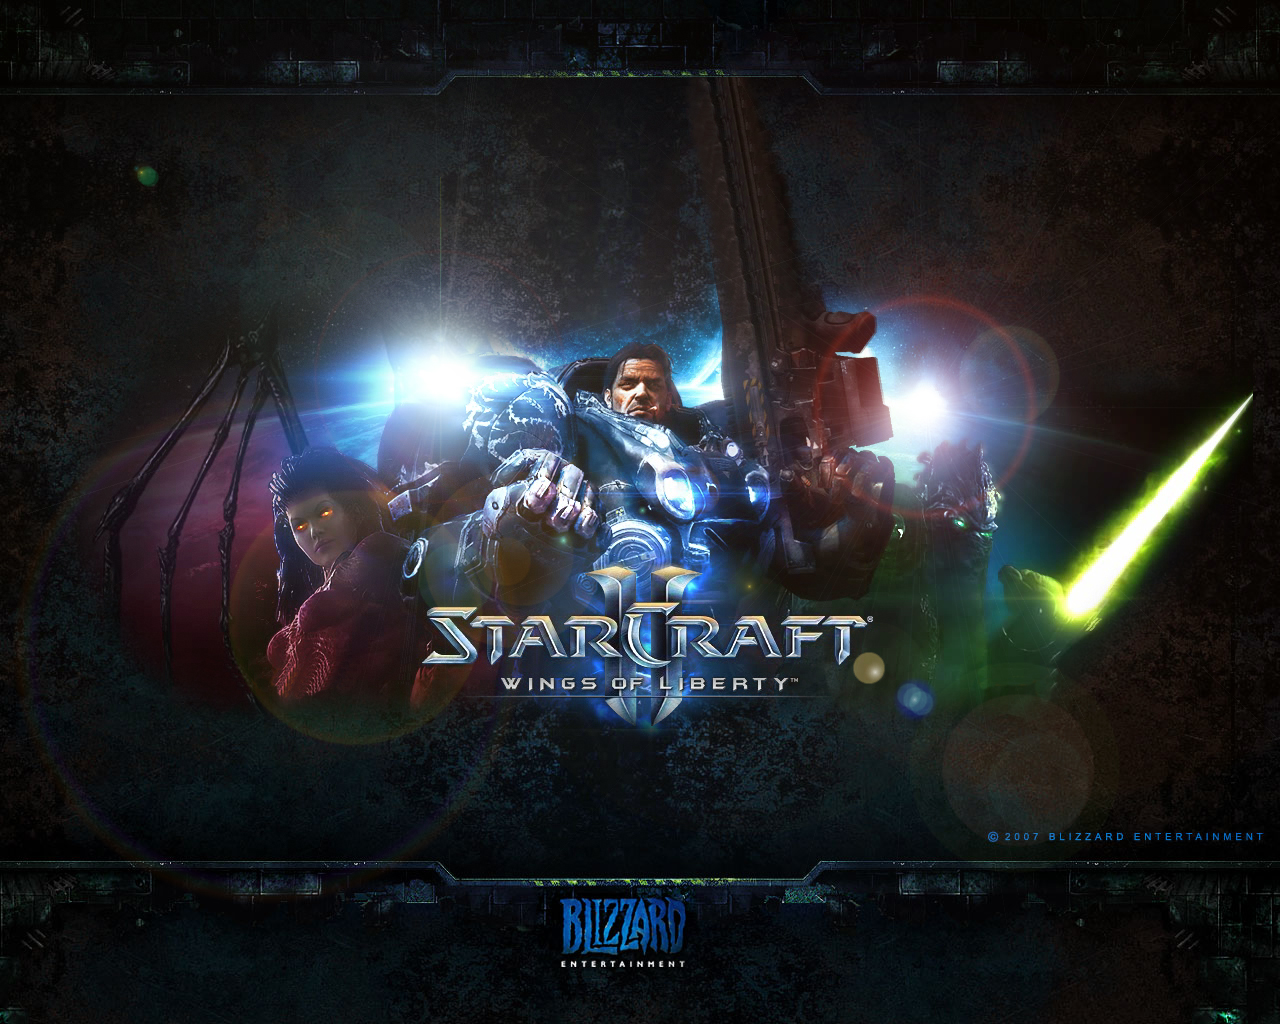 Best Of Starcraft II Wallpapers   Personal Blog of Mario Xiao a